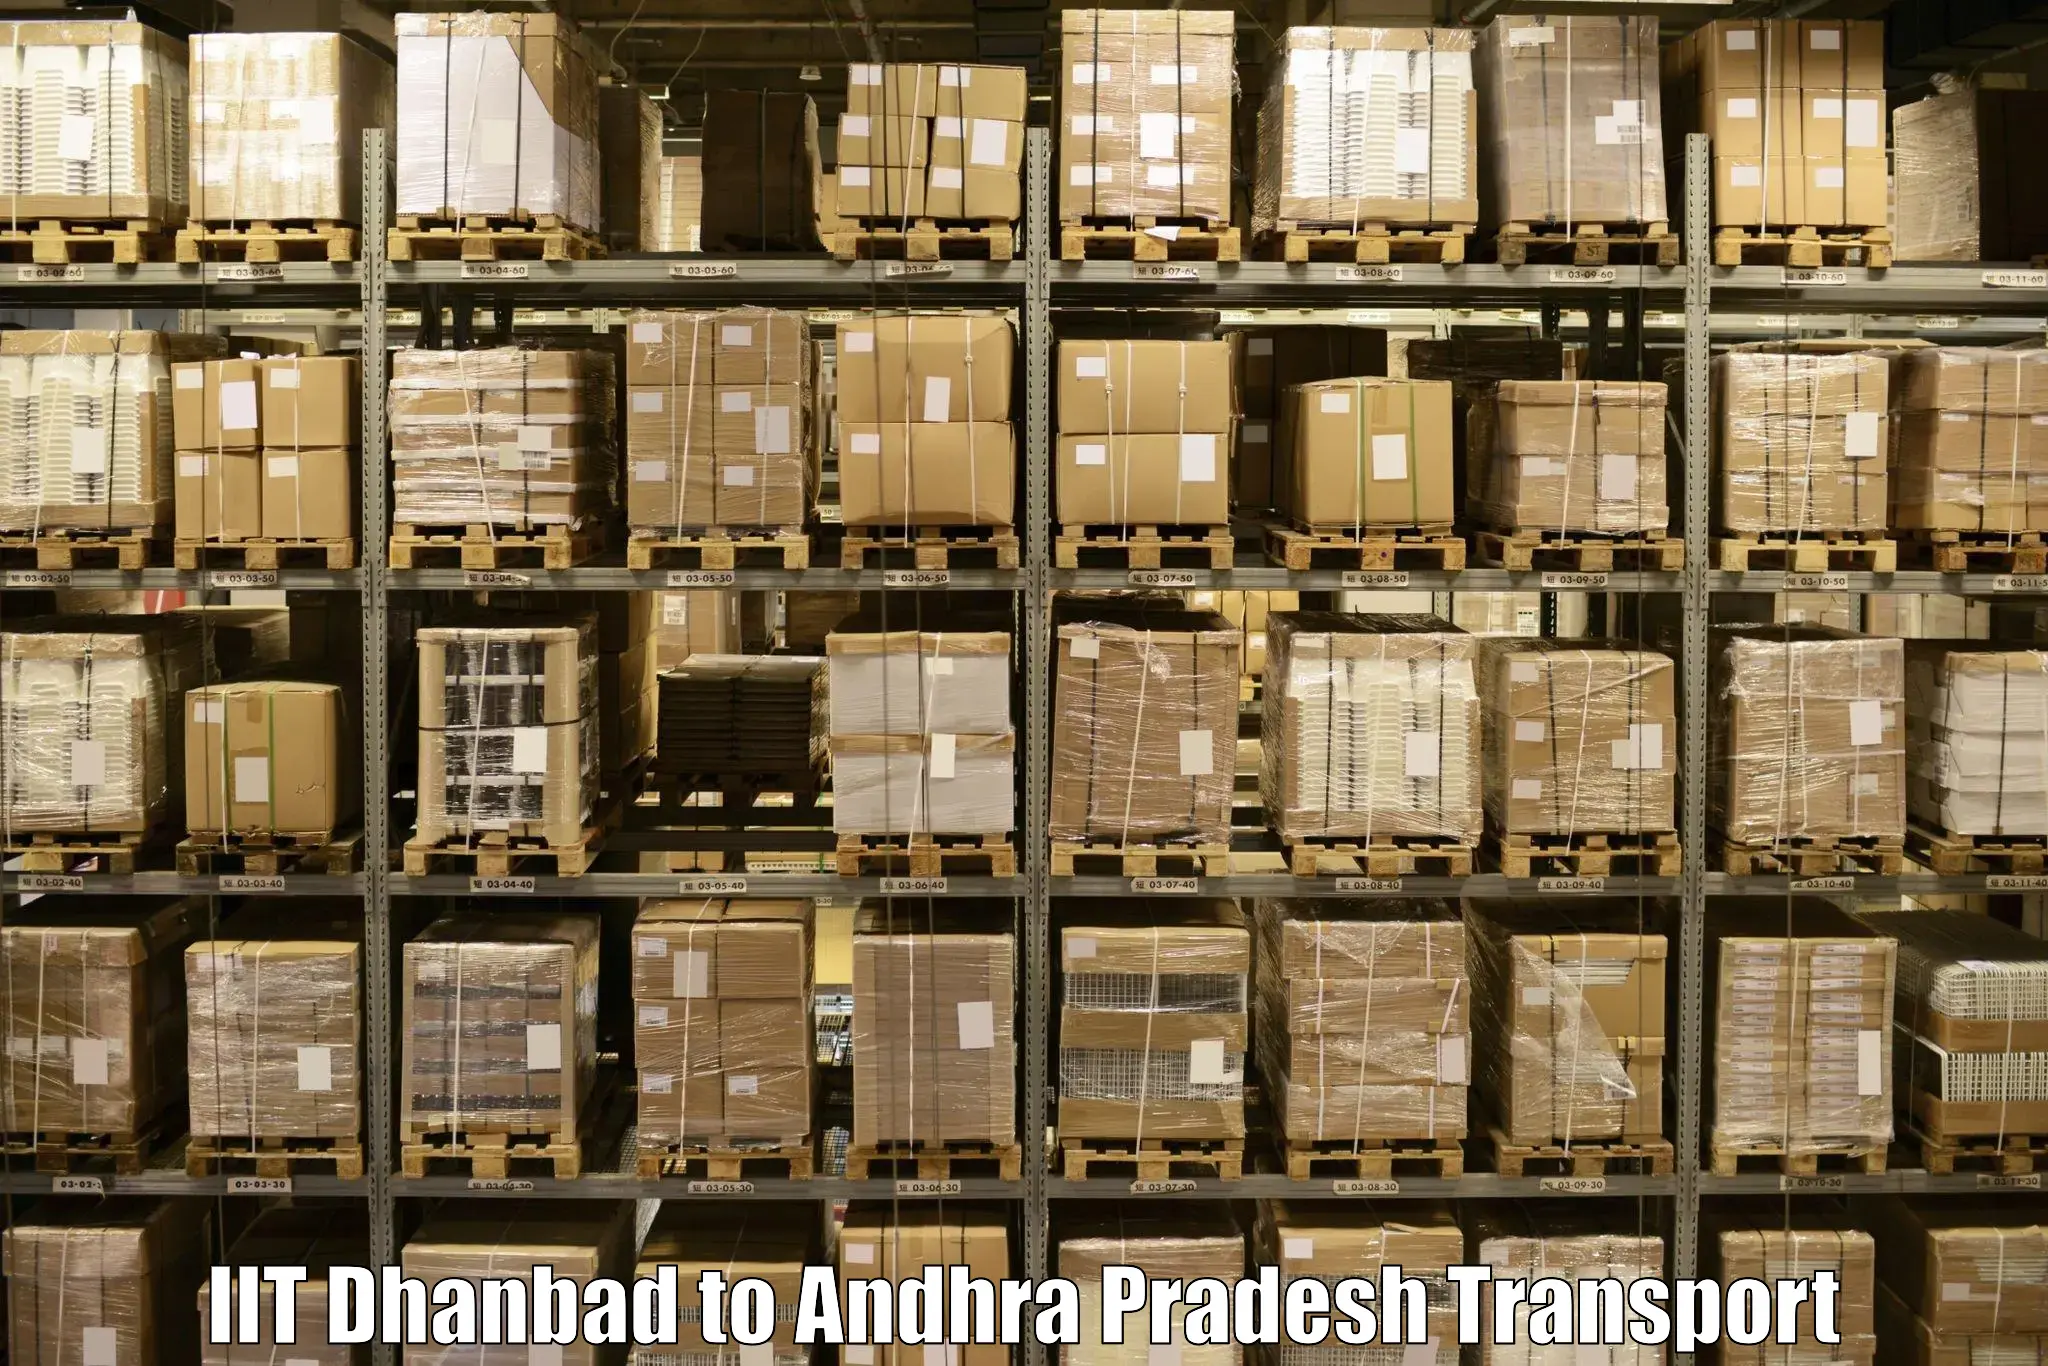 Land transport services in IIT Dhanbad to Chintapalli